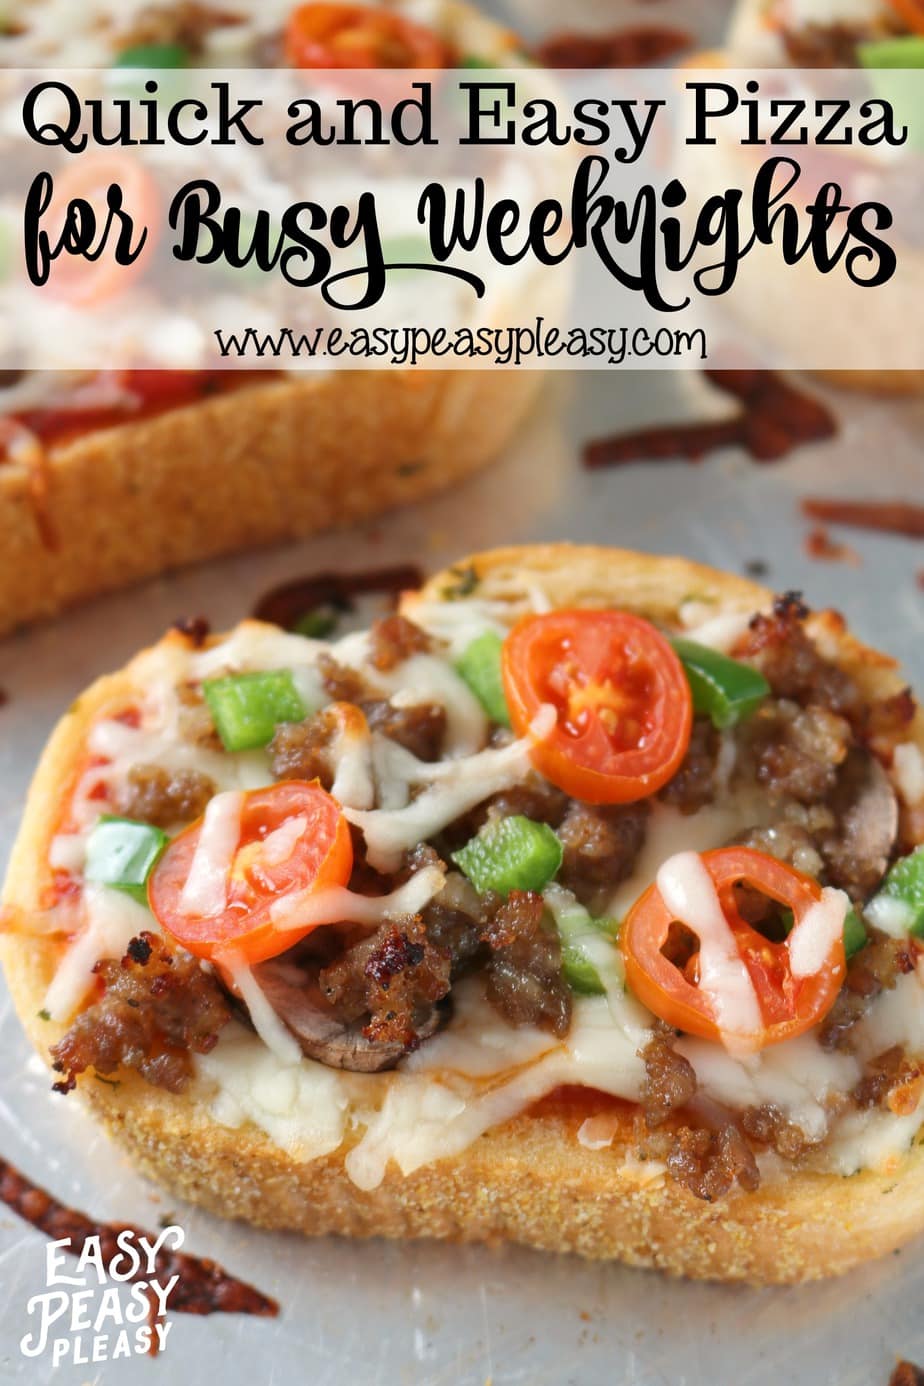 Get dinner on the table with this easy pizza. Grab your favorite Texas Toast Garlic Bread from the freezer aisle with your favorite pizza toppings for an easy weeknight dinner done in 20 minutes or less.